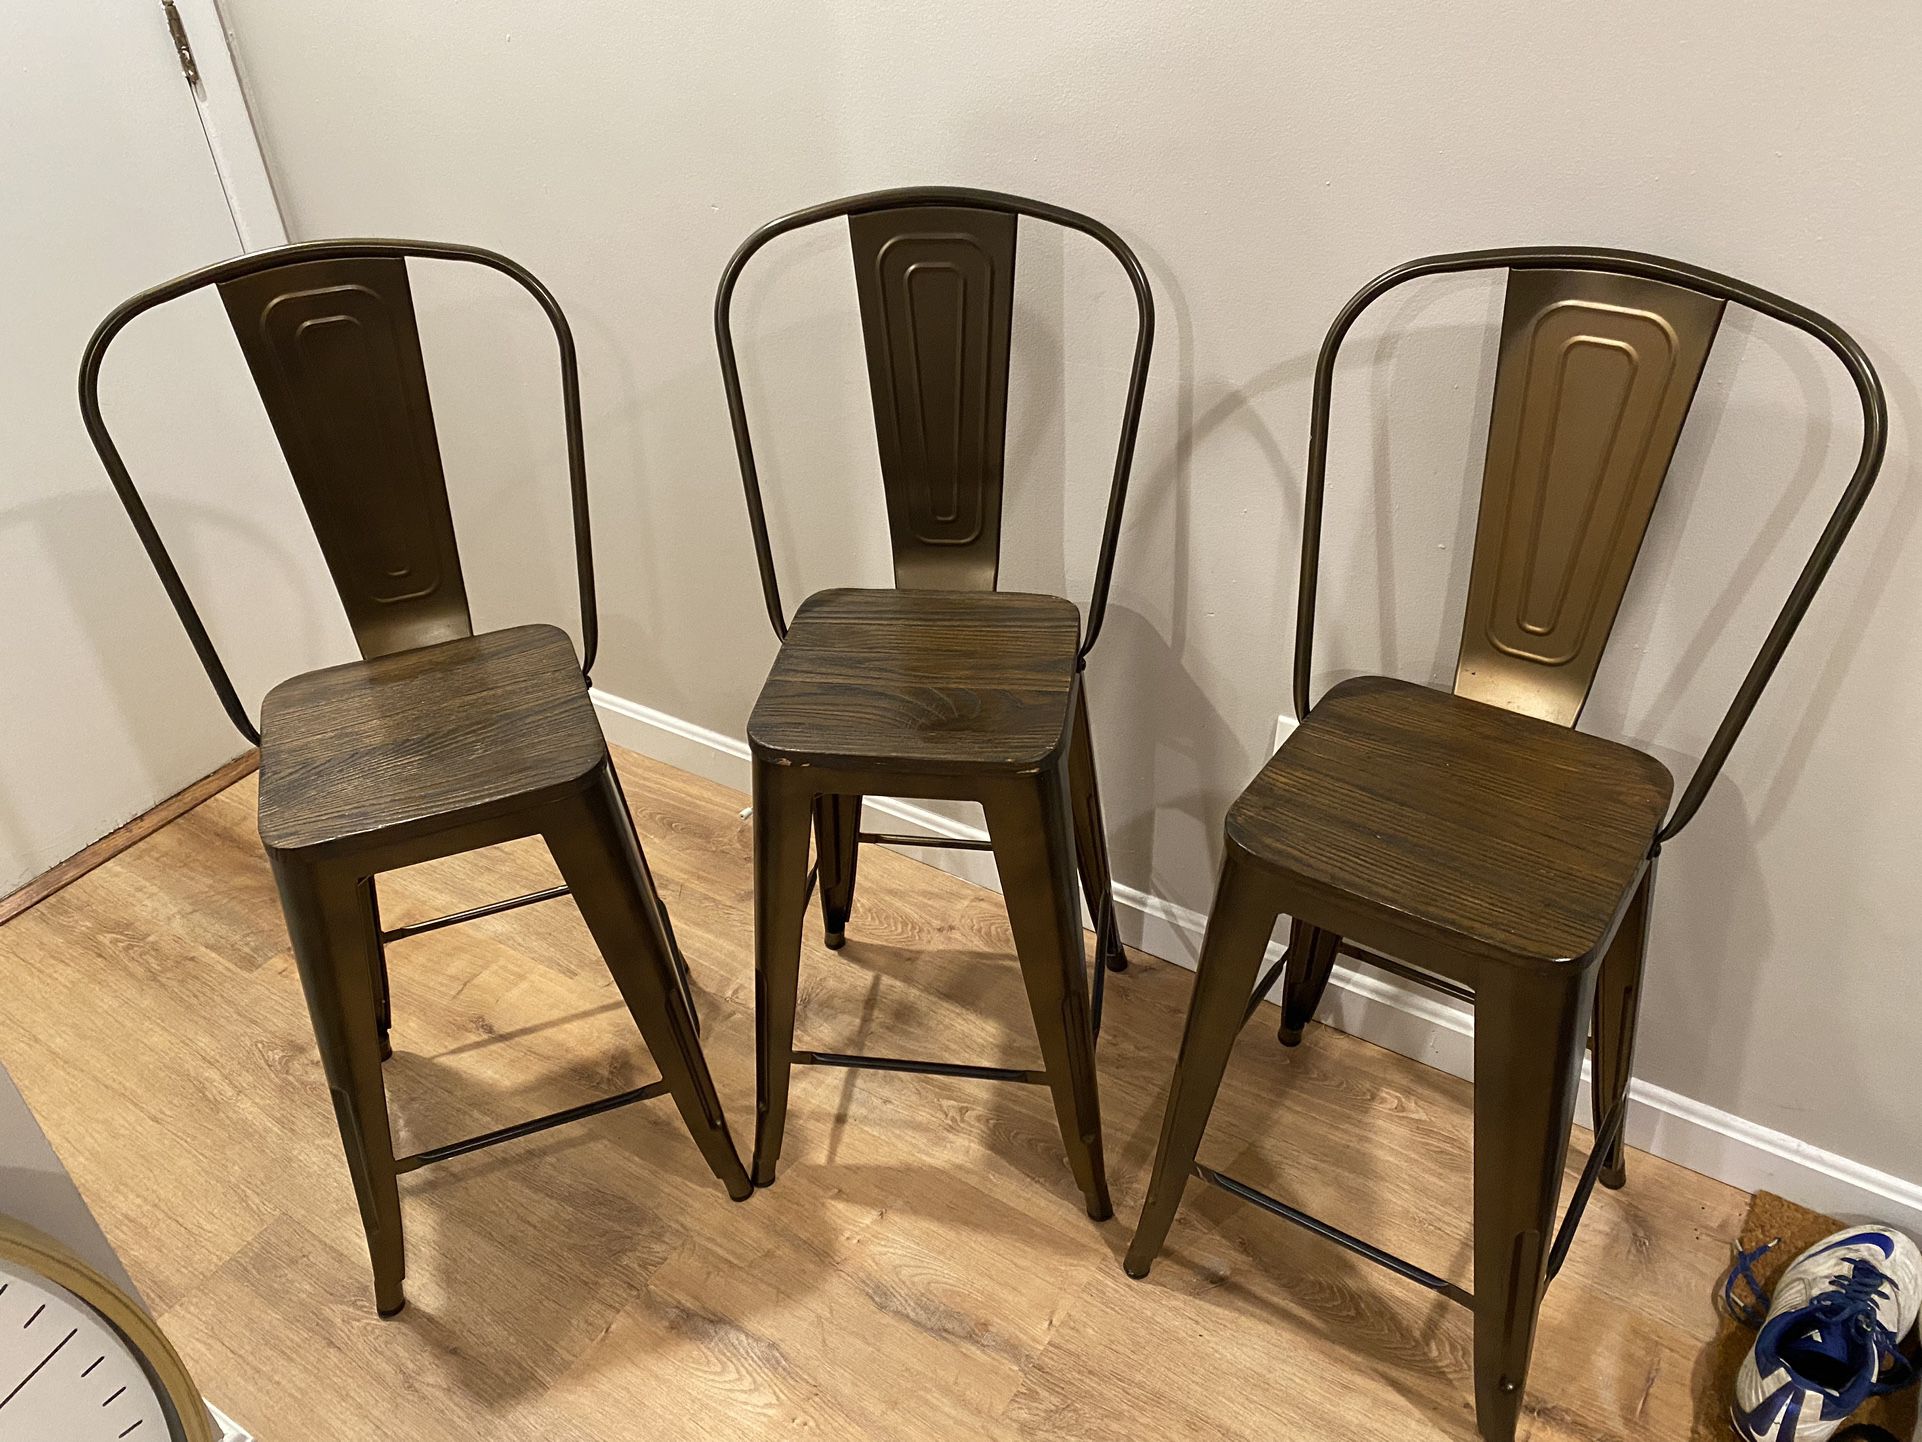 Set Of 3 Gold / Bronze Barstools With Back Support